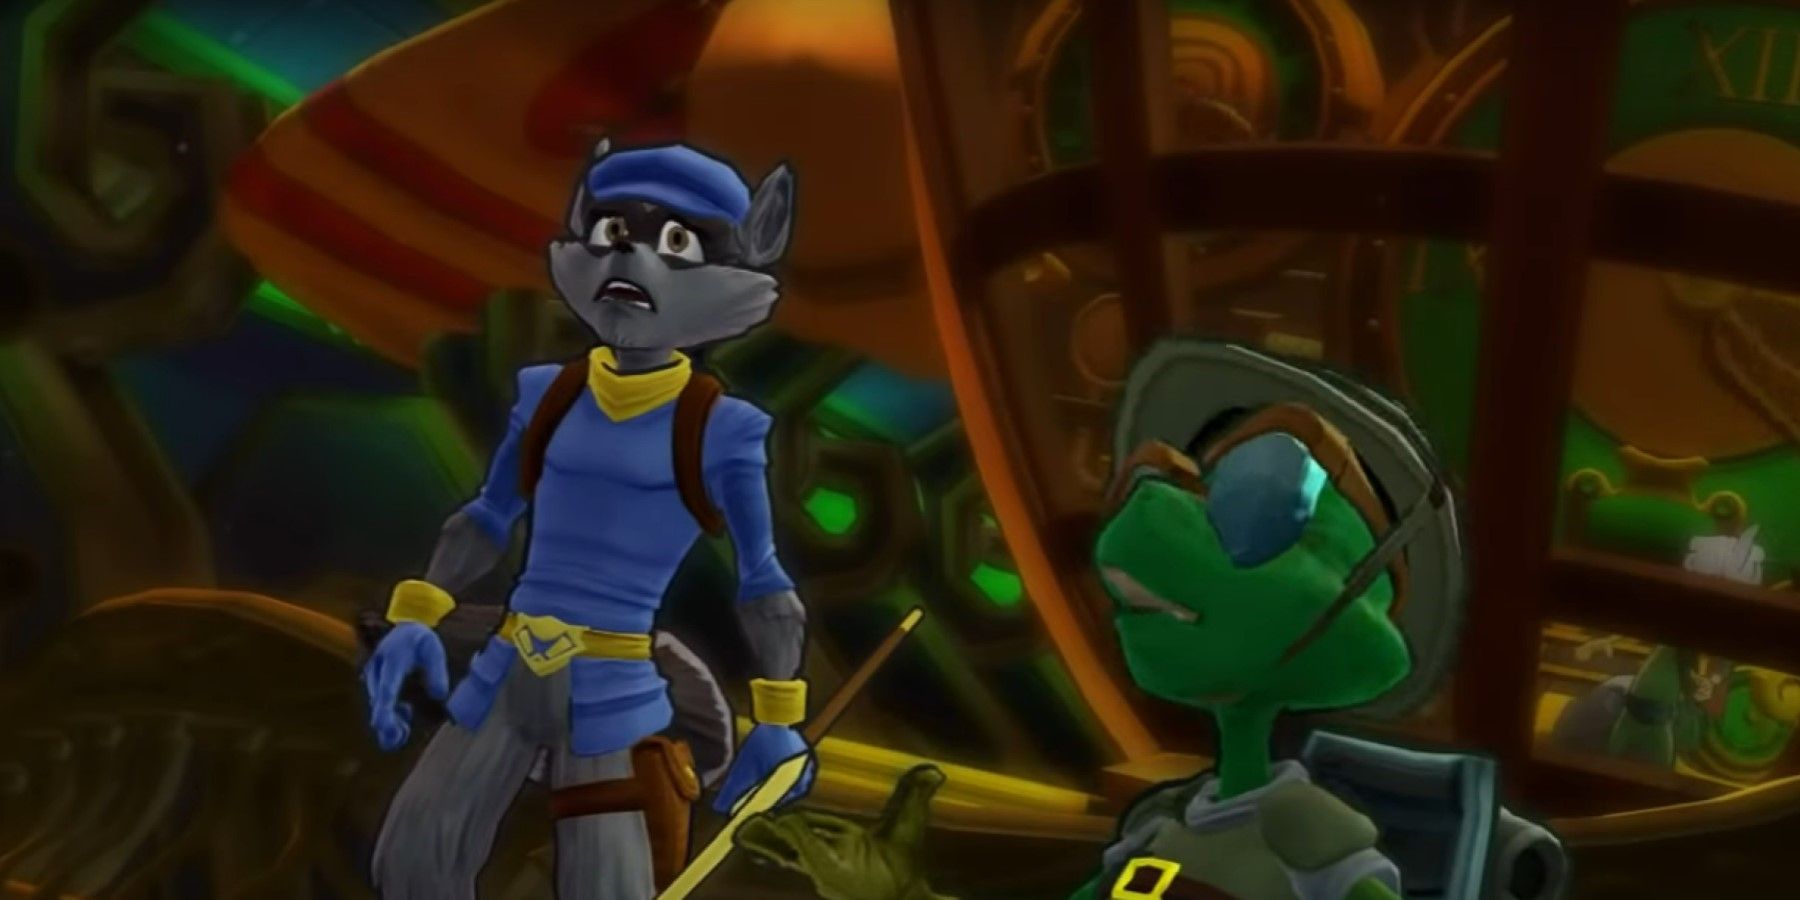 After years of Sly Cooper starvation I finally got around to emulating the  HD collection. It's nice to see the best level of the best game of the  trilogy in HD!!! Makes